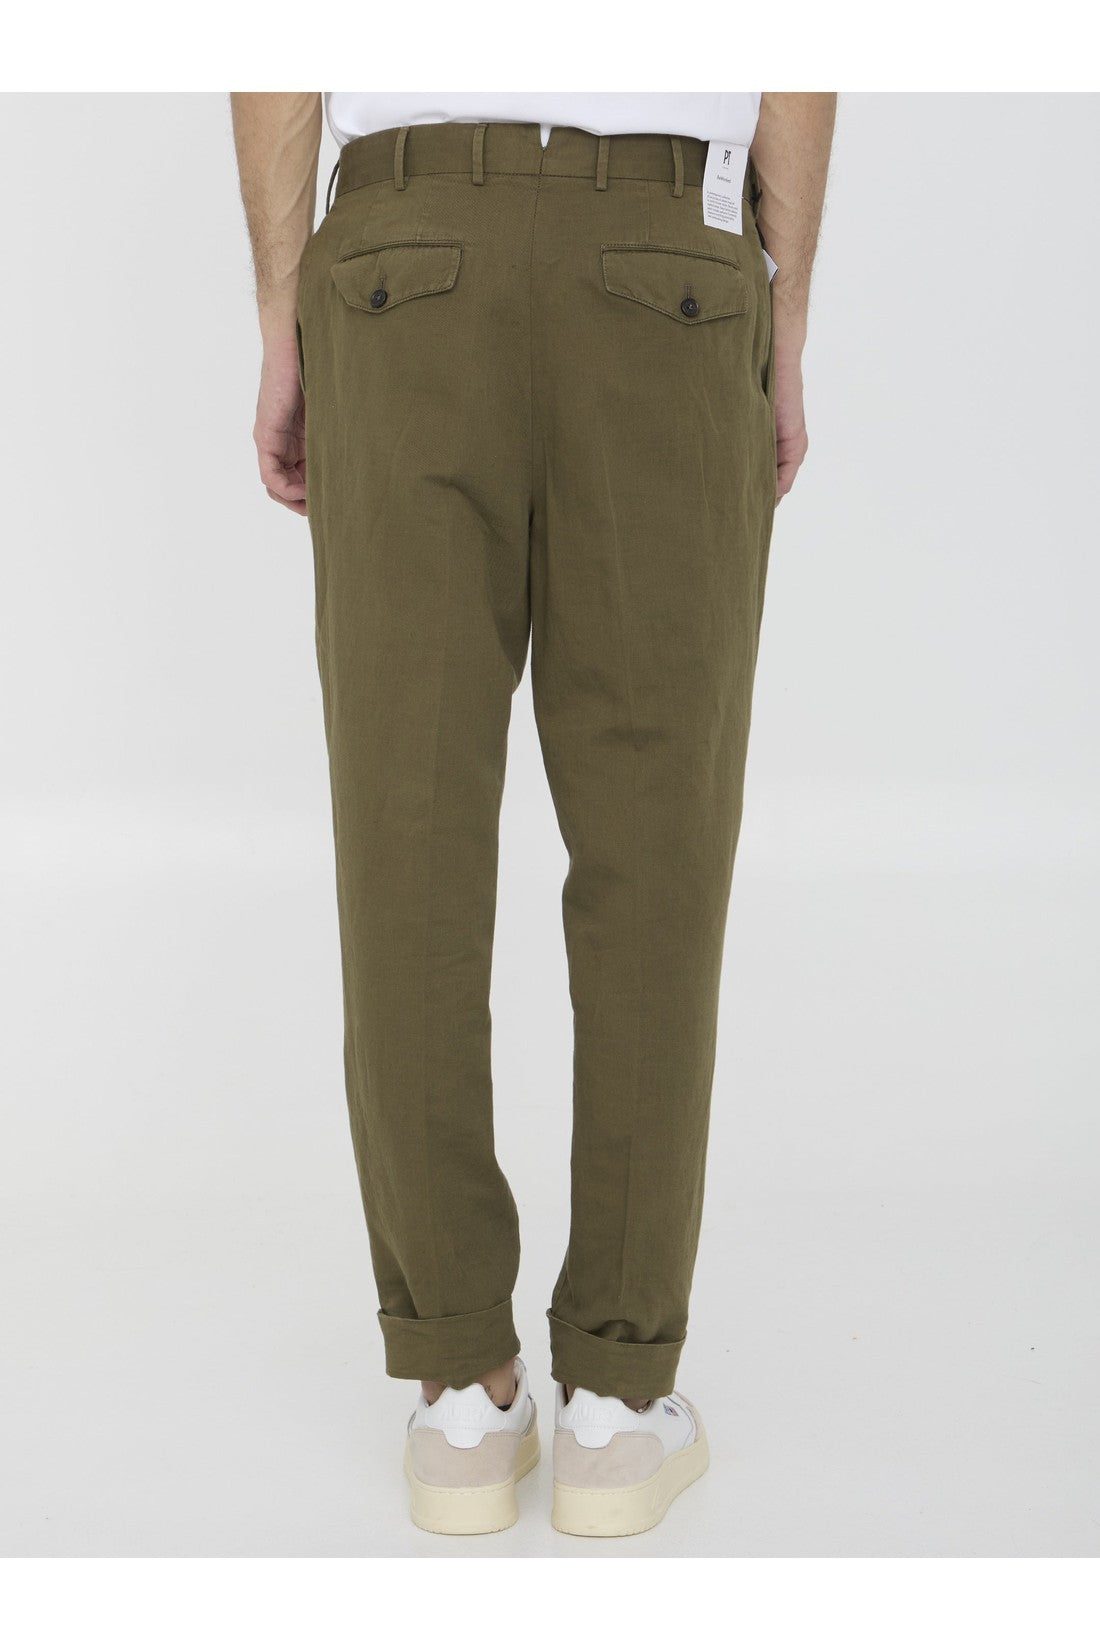 Cotton and linen trousers